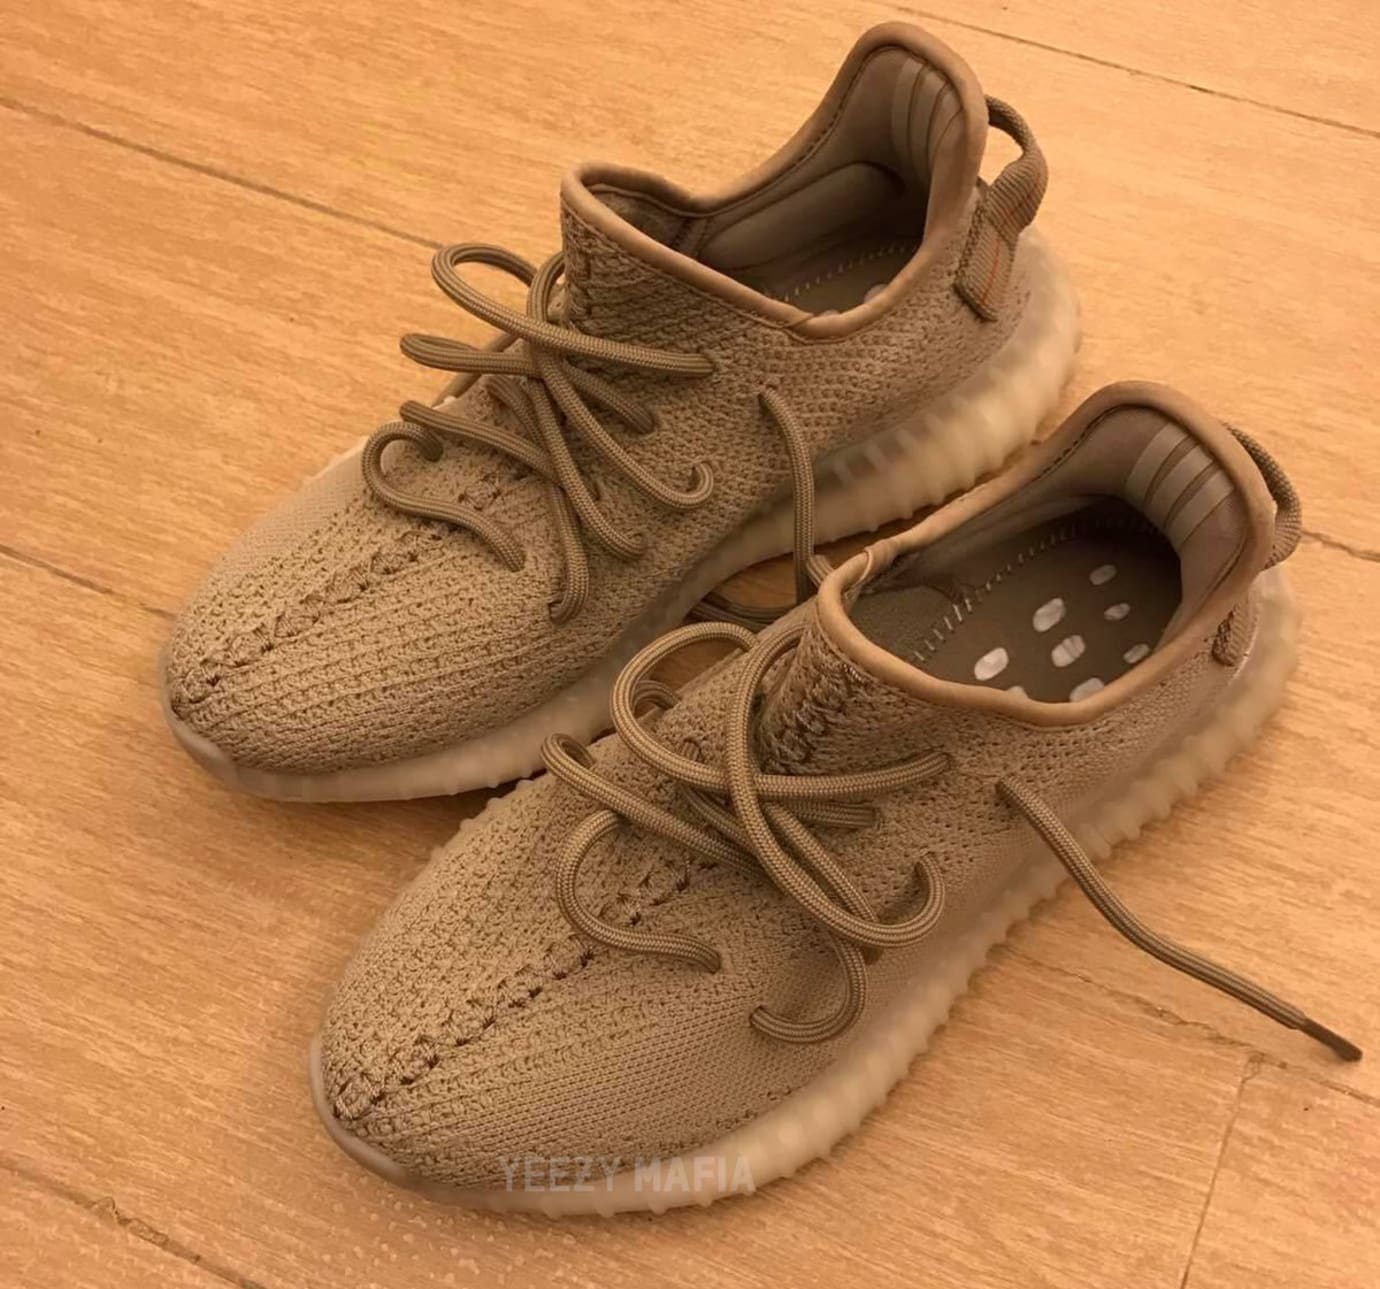 Earth Adidas Yeezy Boost 350 V2 | Sole Collector